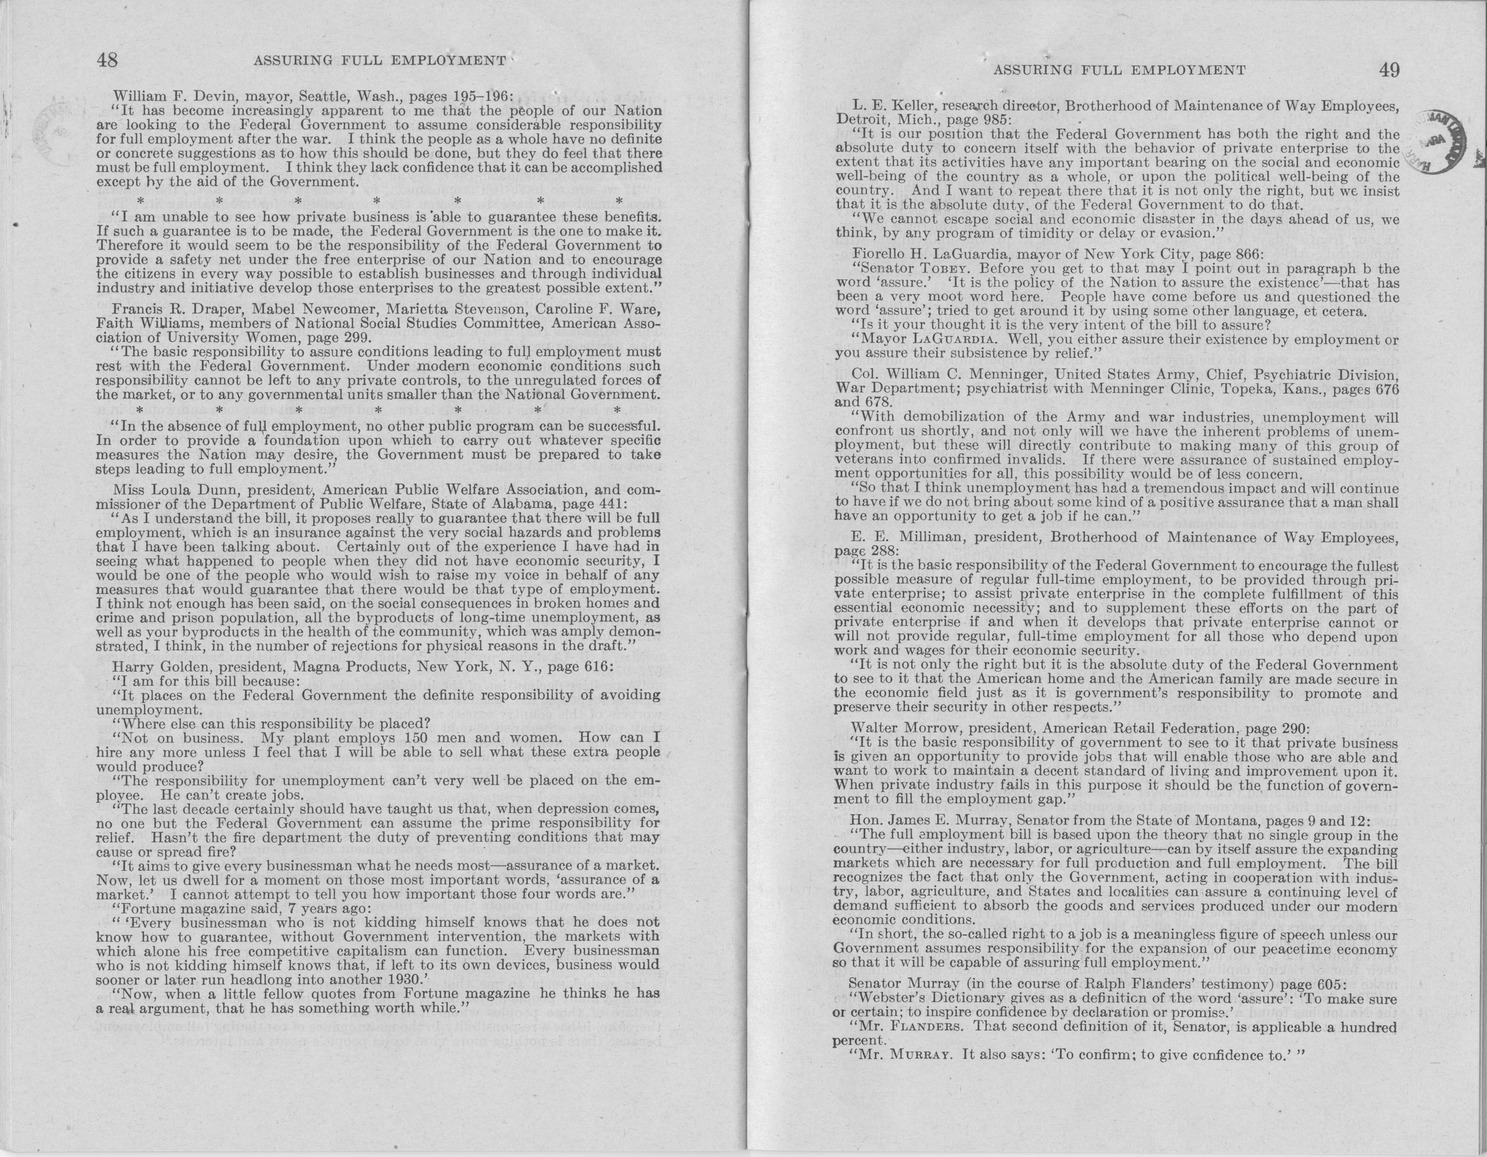 Memorandum from Harold D. Smith to M. C. Latta, S. 380, To Declare a National Policy on Employment, Production, and Purchasing Power, and for Other Purposes, with Attachments